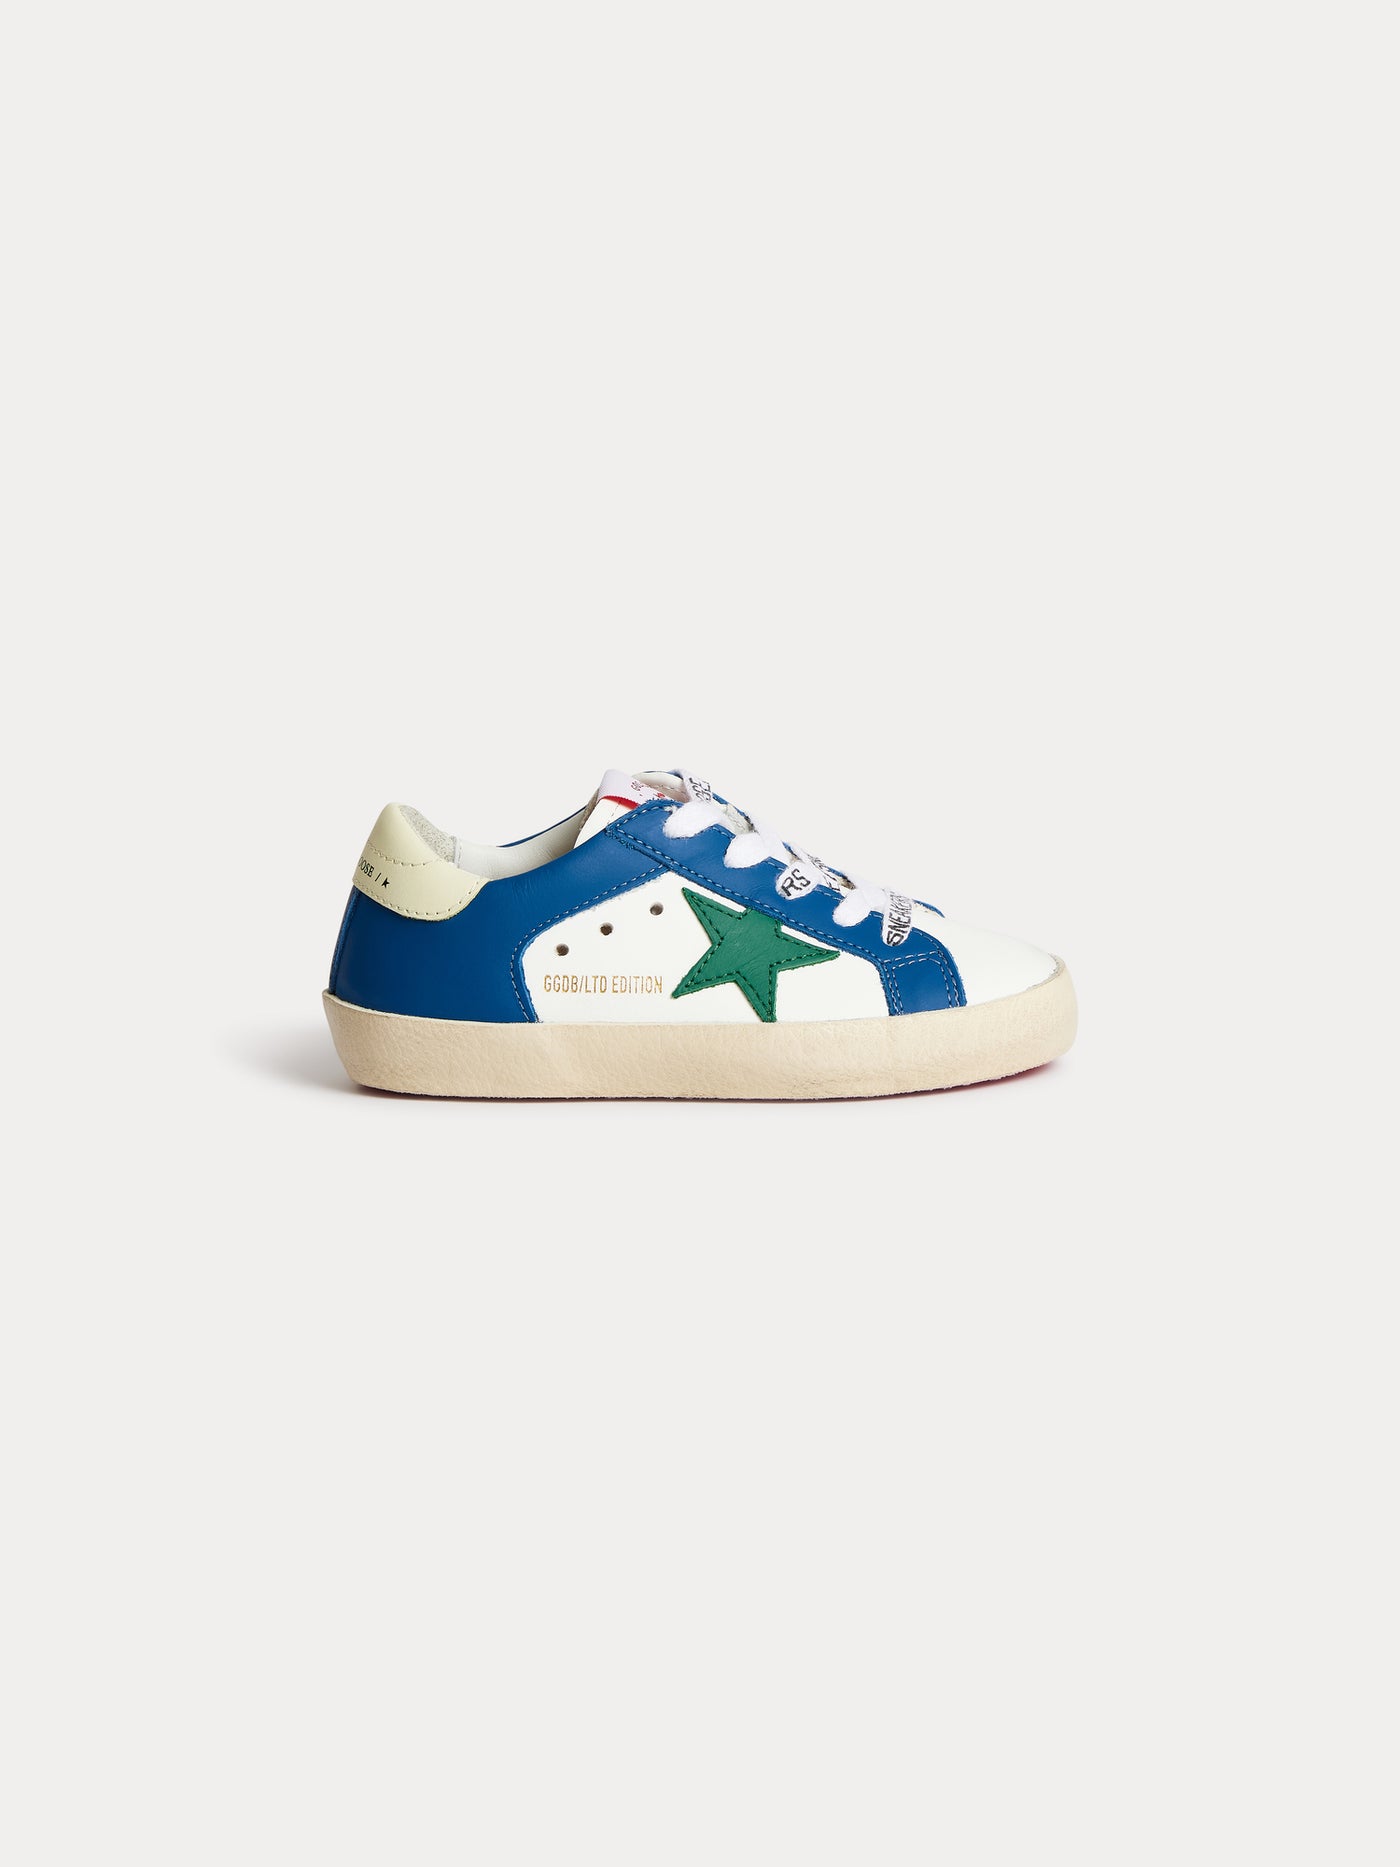 Sneakers Golden Goose x Bonpoint Northern Blue